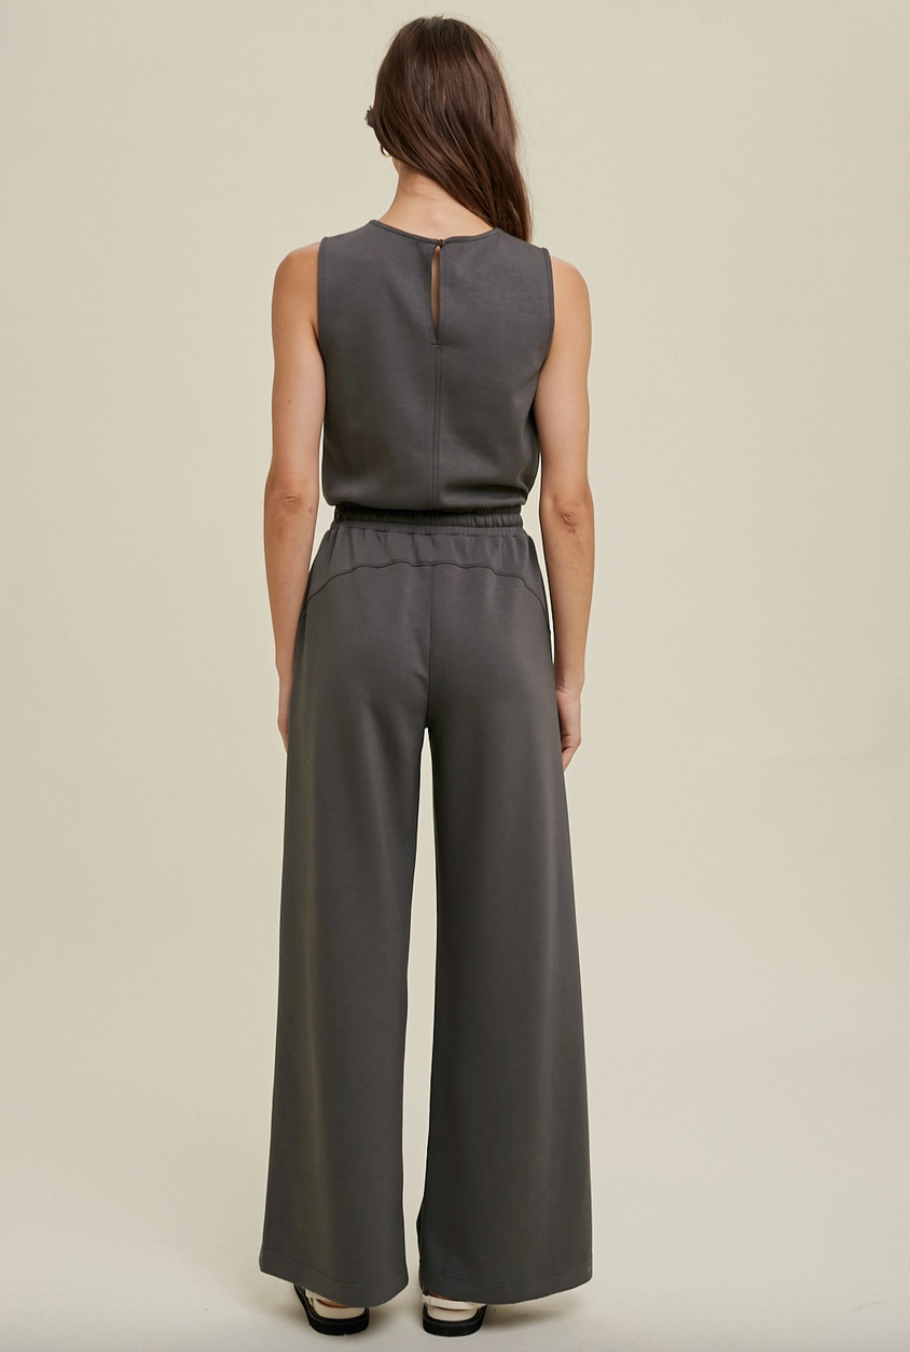 the ebb and flow jumpsuit